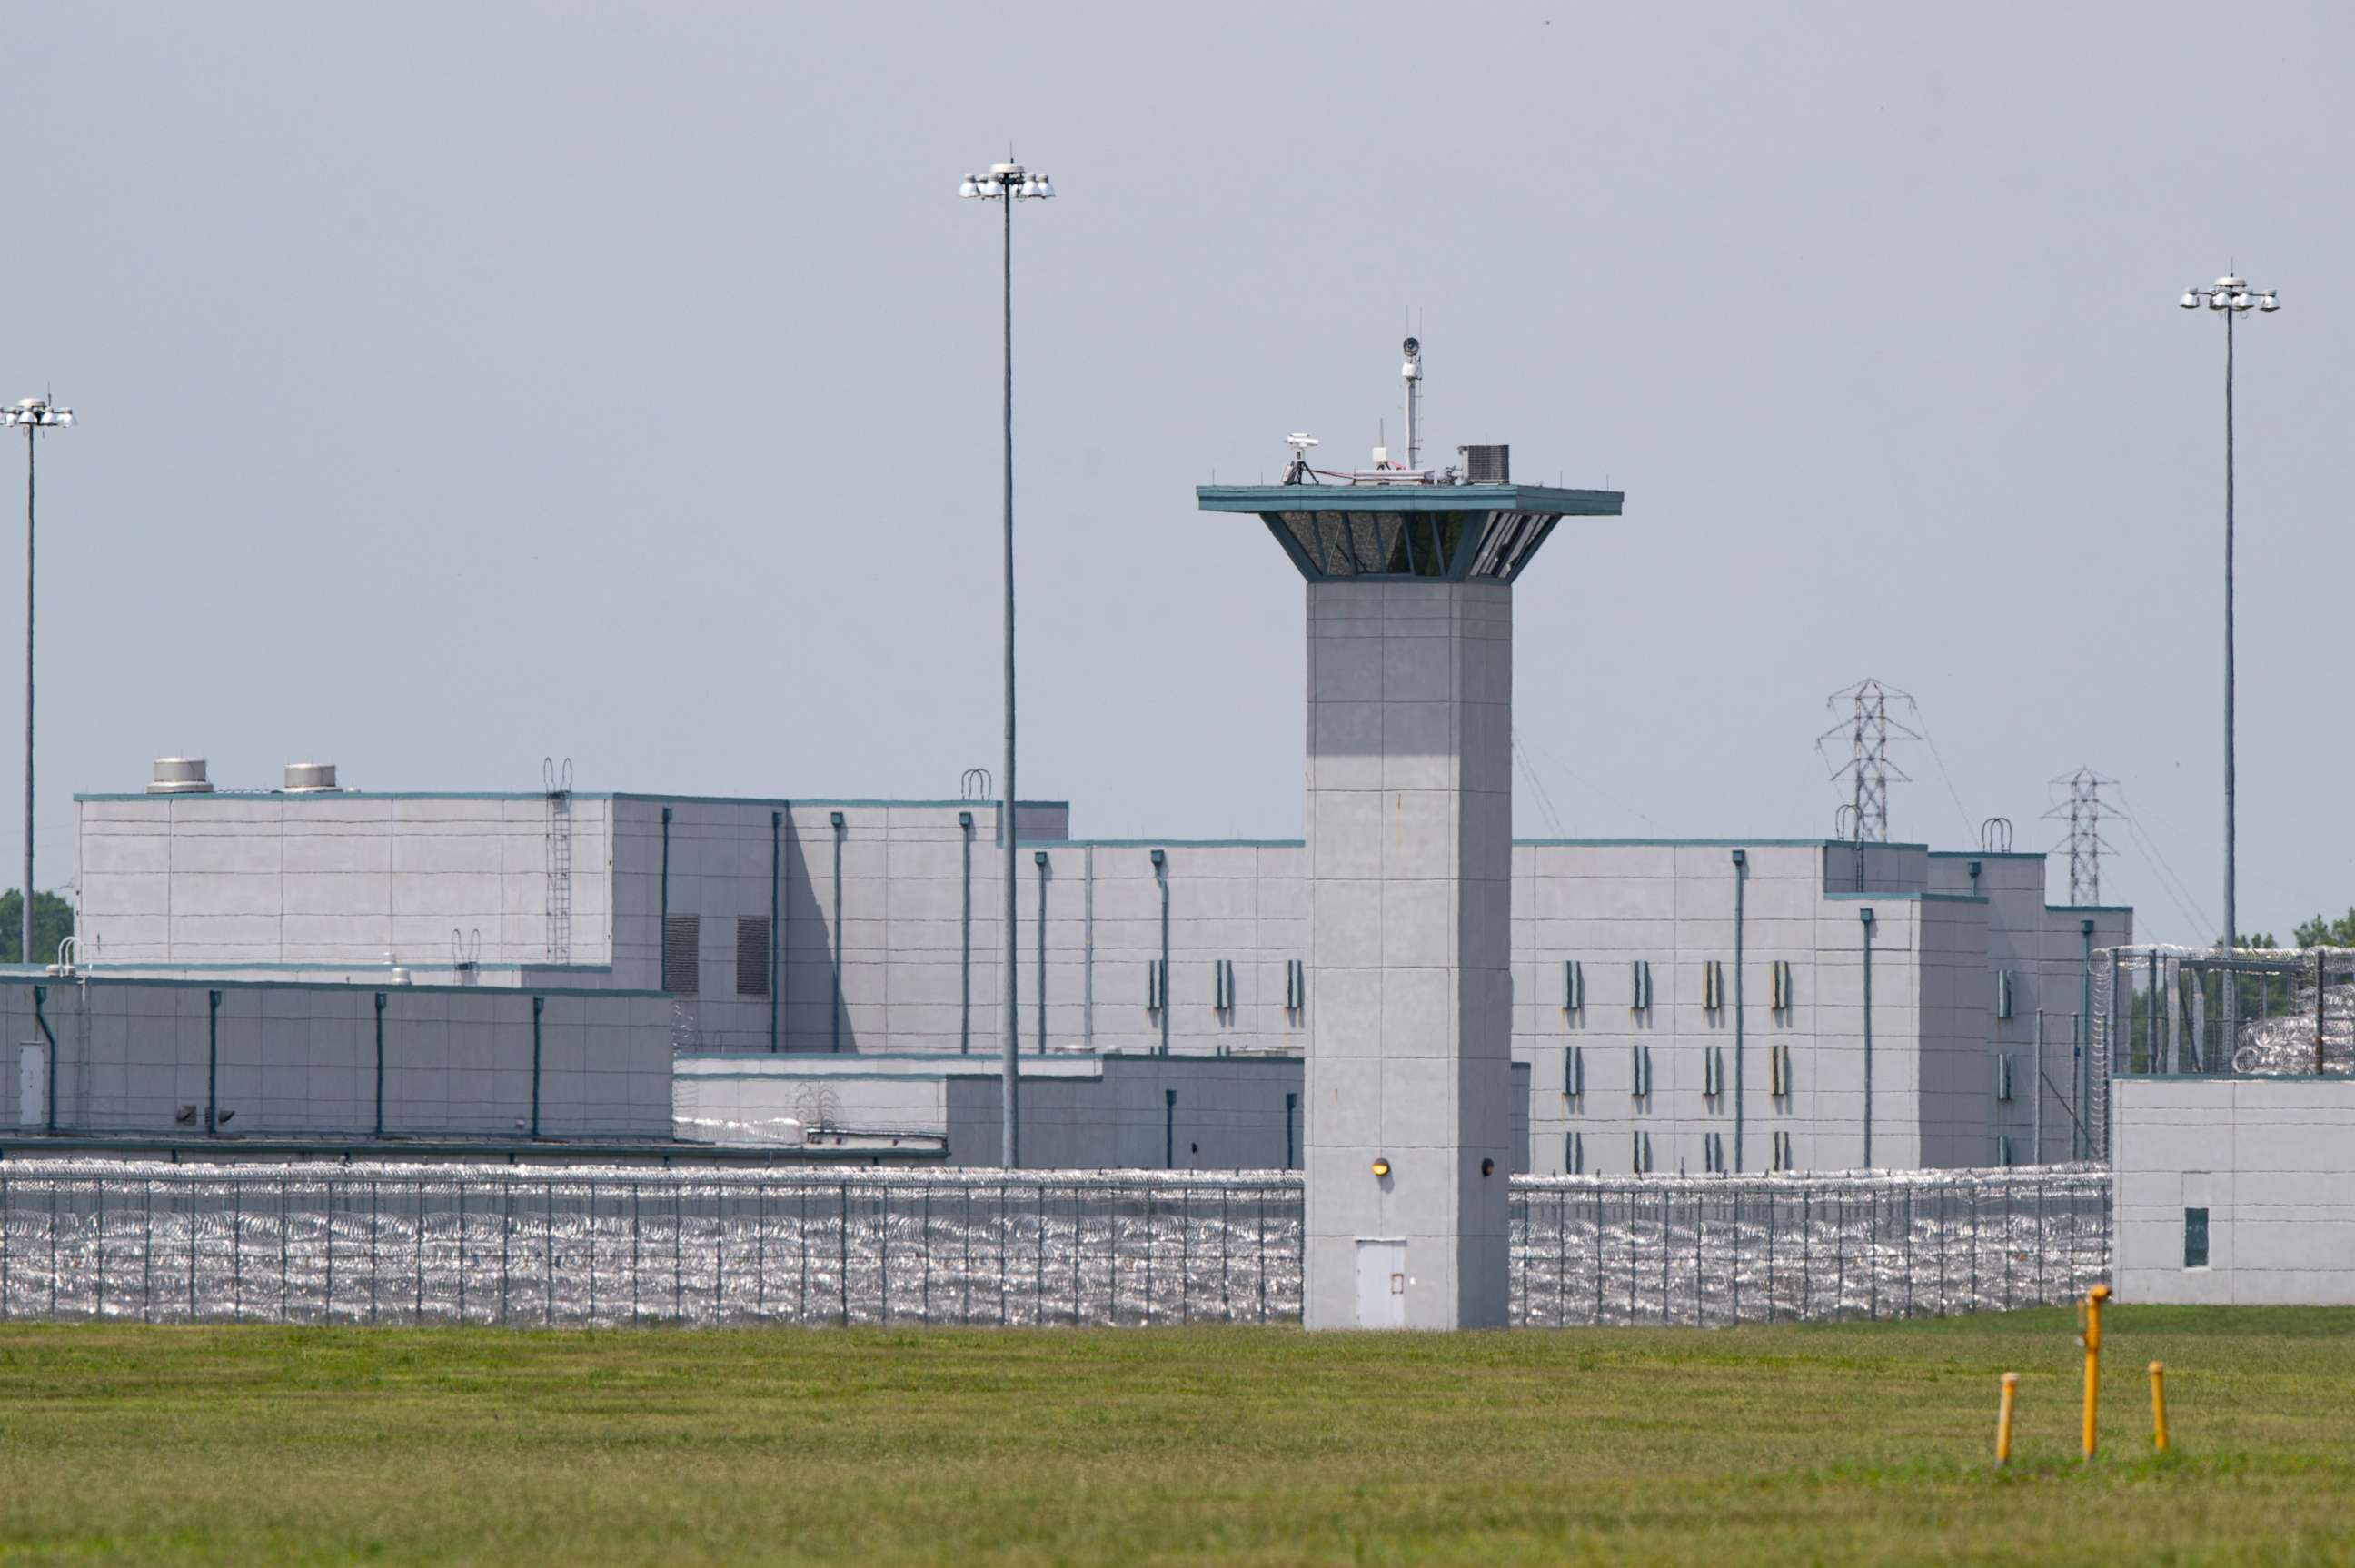 PHOTO: The entrance to the federal prison in Terre Haute, Ind., is seen Wednesday, July 15, 2020. Wesley Ira Purkey, convicted of a gruesome 1998 kidnapping and killing, is scheduled to be executed Wednesday evening at the prison.